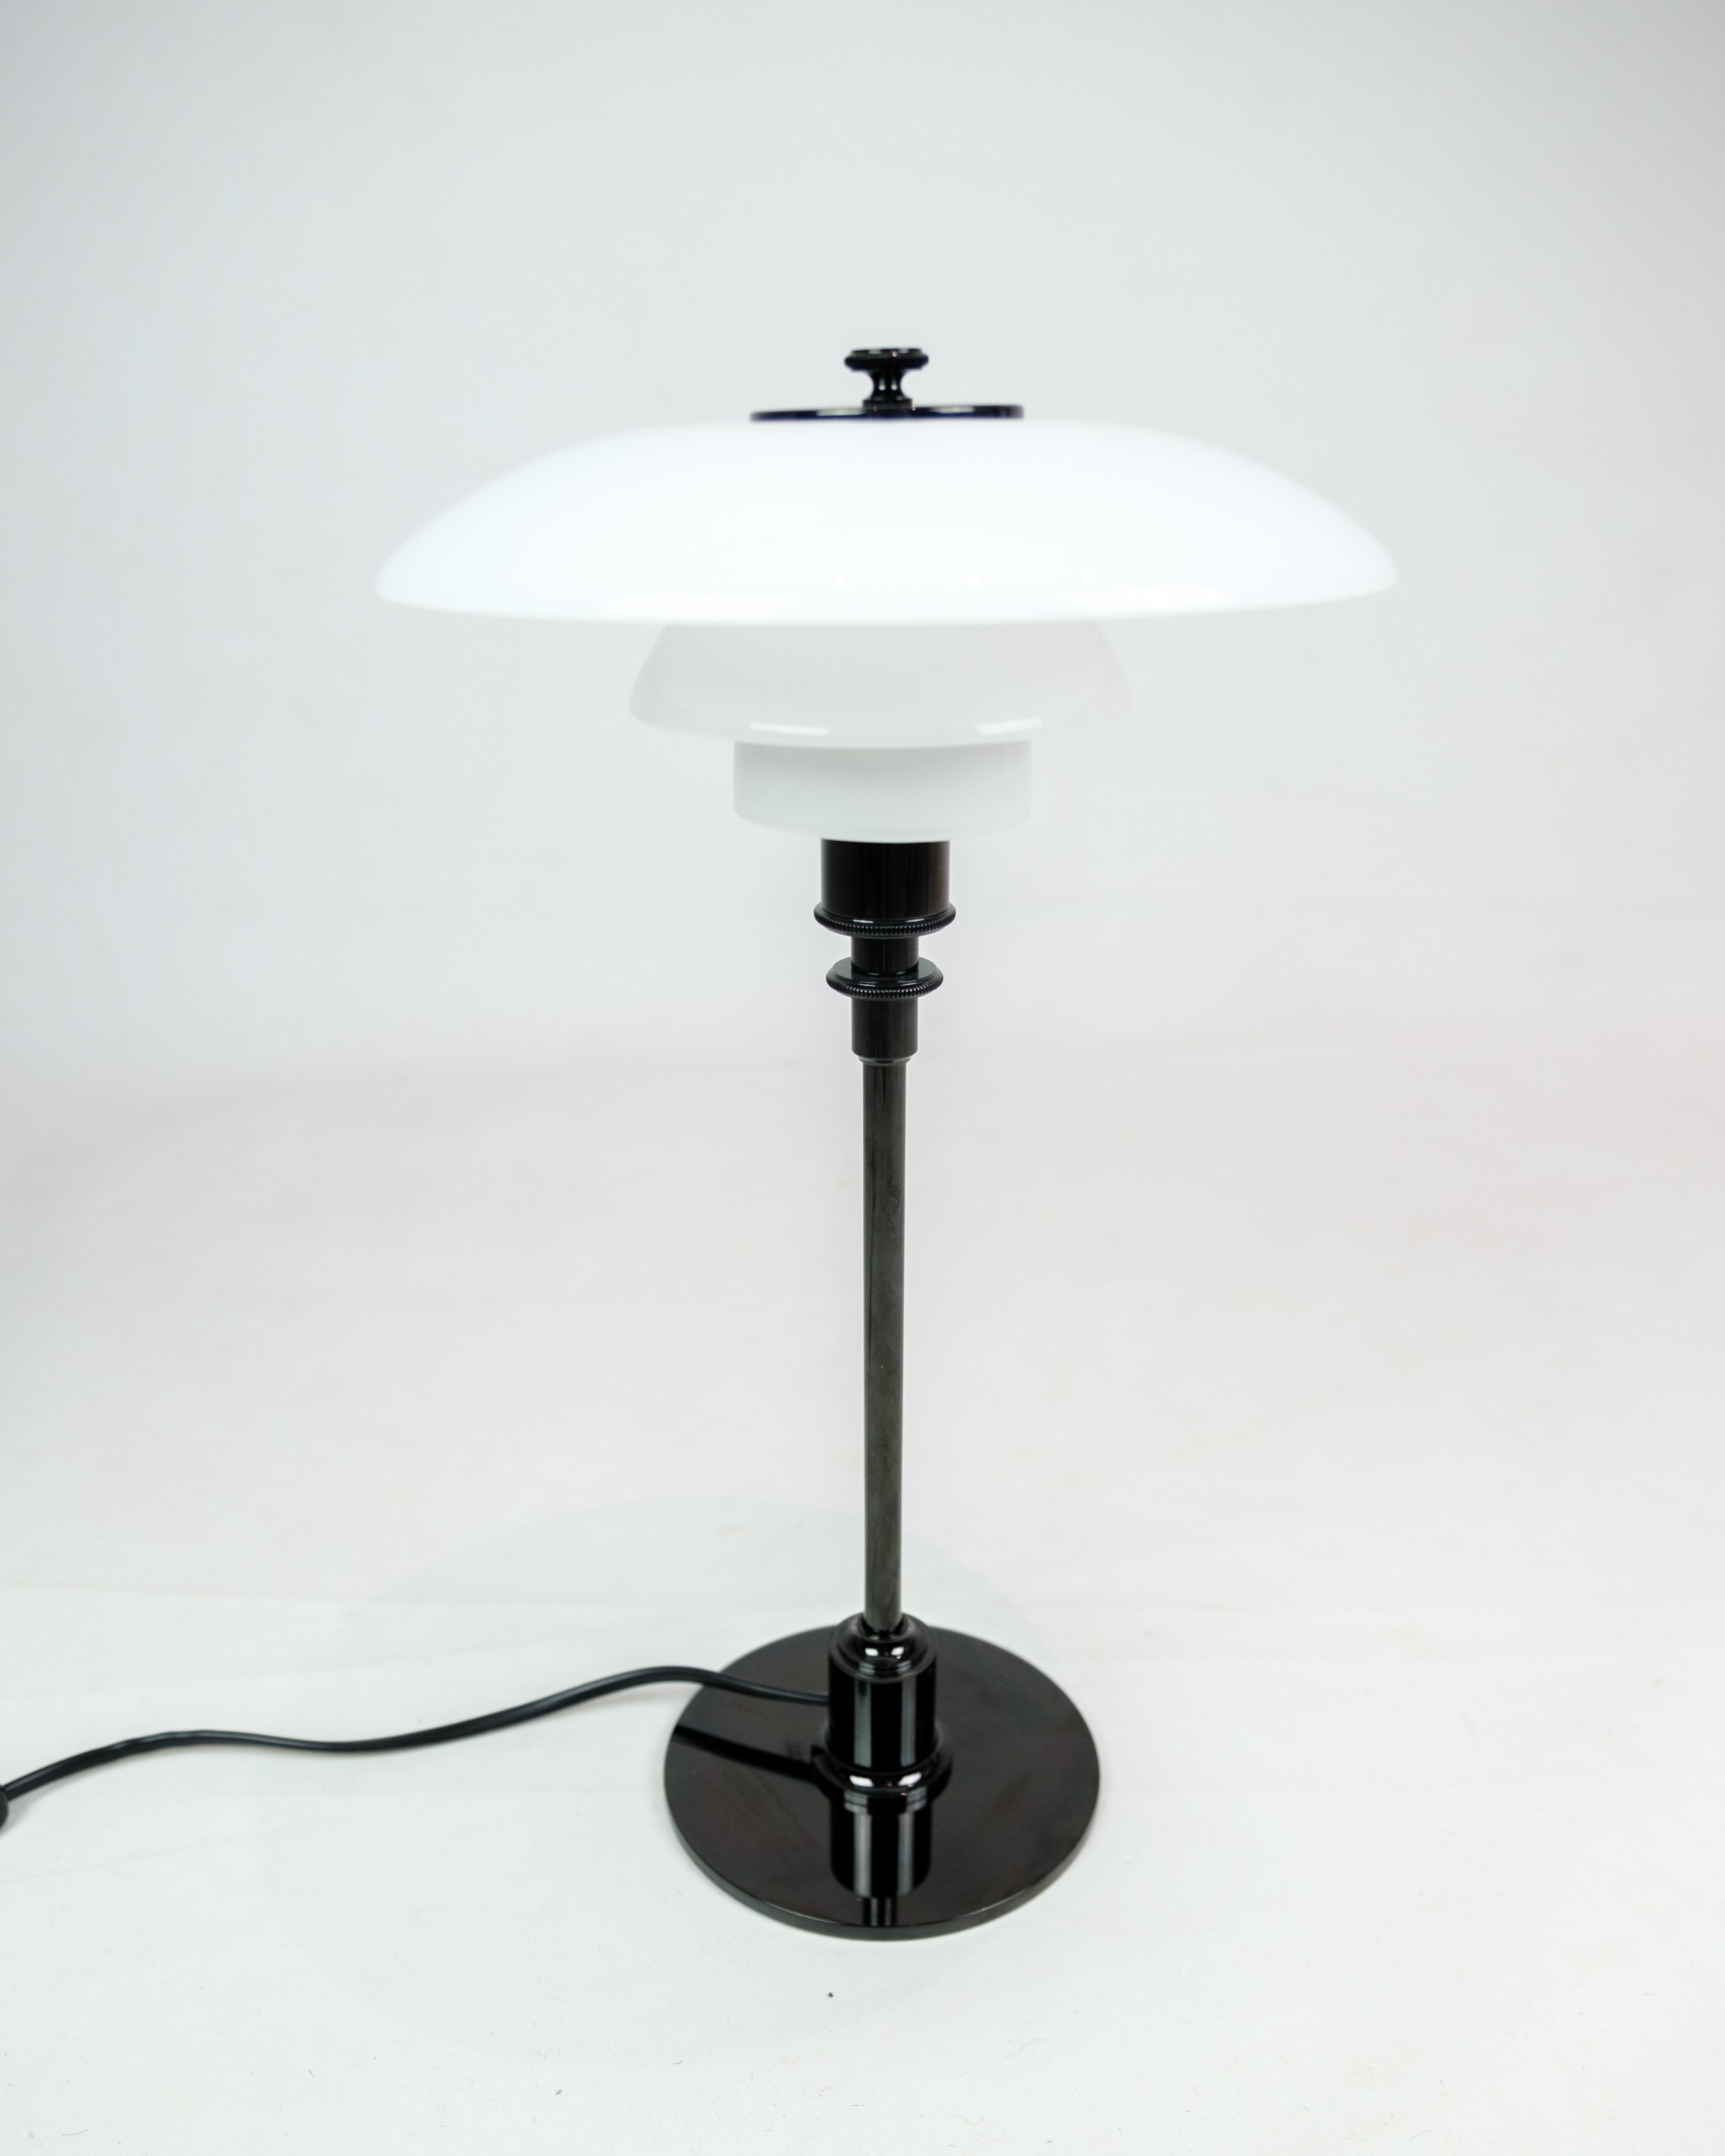 Experience the timeless elegance of Poul Henningsen's iconic design with this table lamp, model 3/2, in black metallized design, manufactured by Louis Poulsen. This lamp is not just a light source; it is a masterpiece of mid-century lighting design